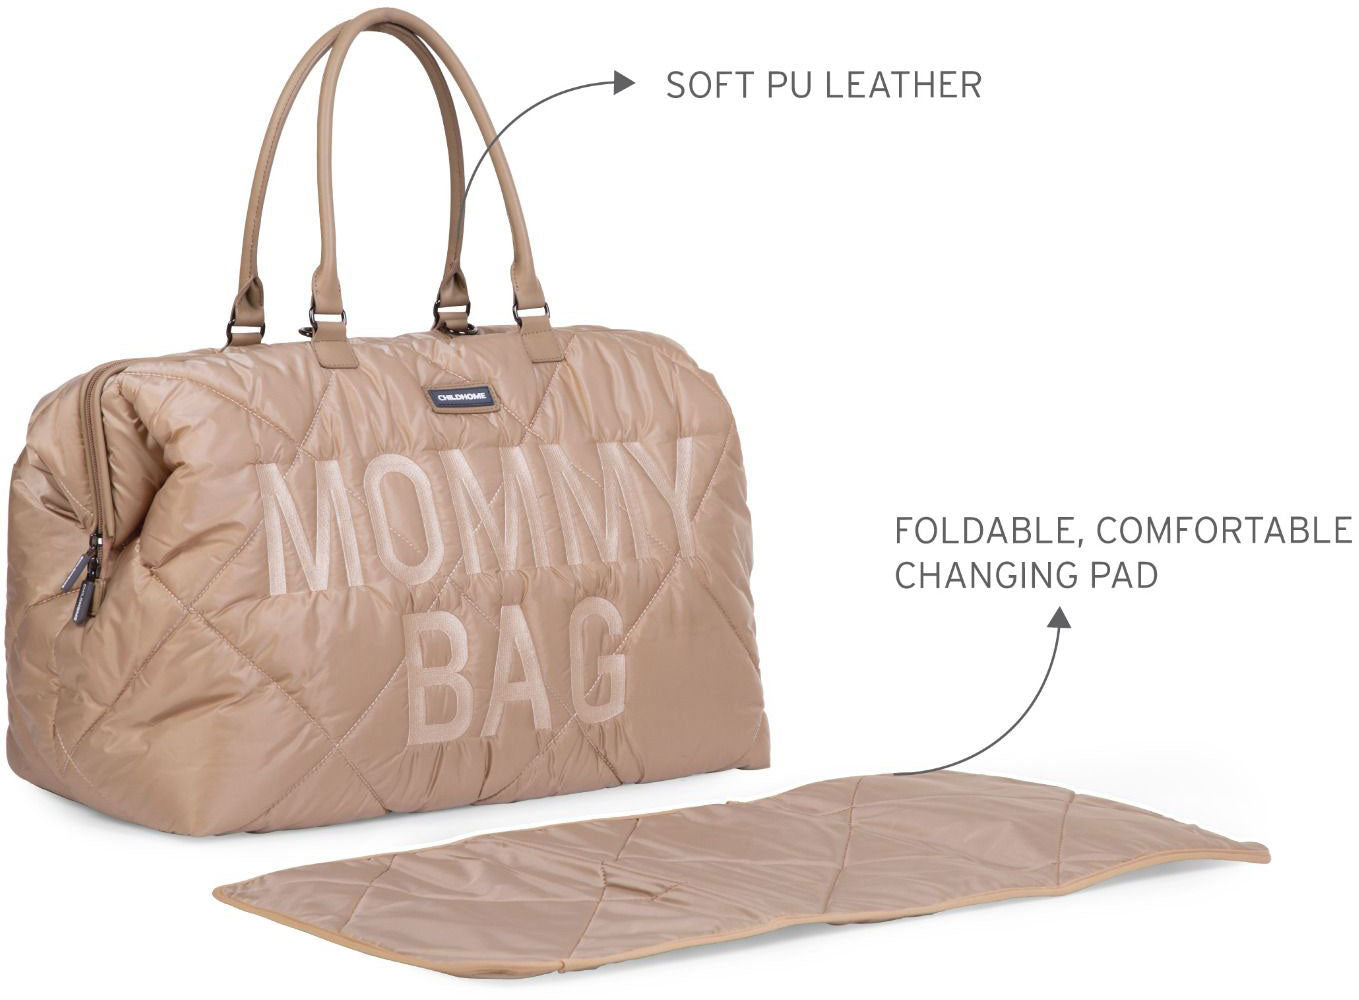 Mommy Bag Big Quilted Puffered Beige - ChildHome